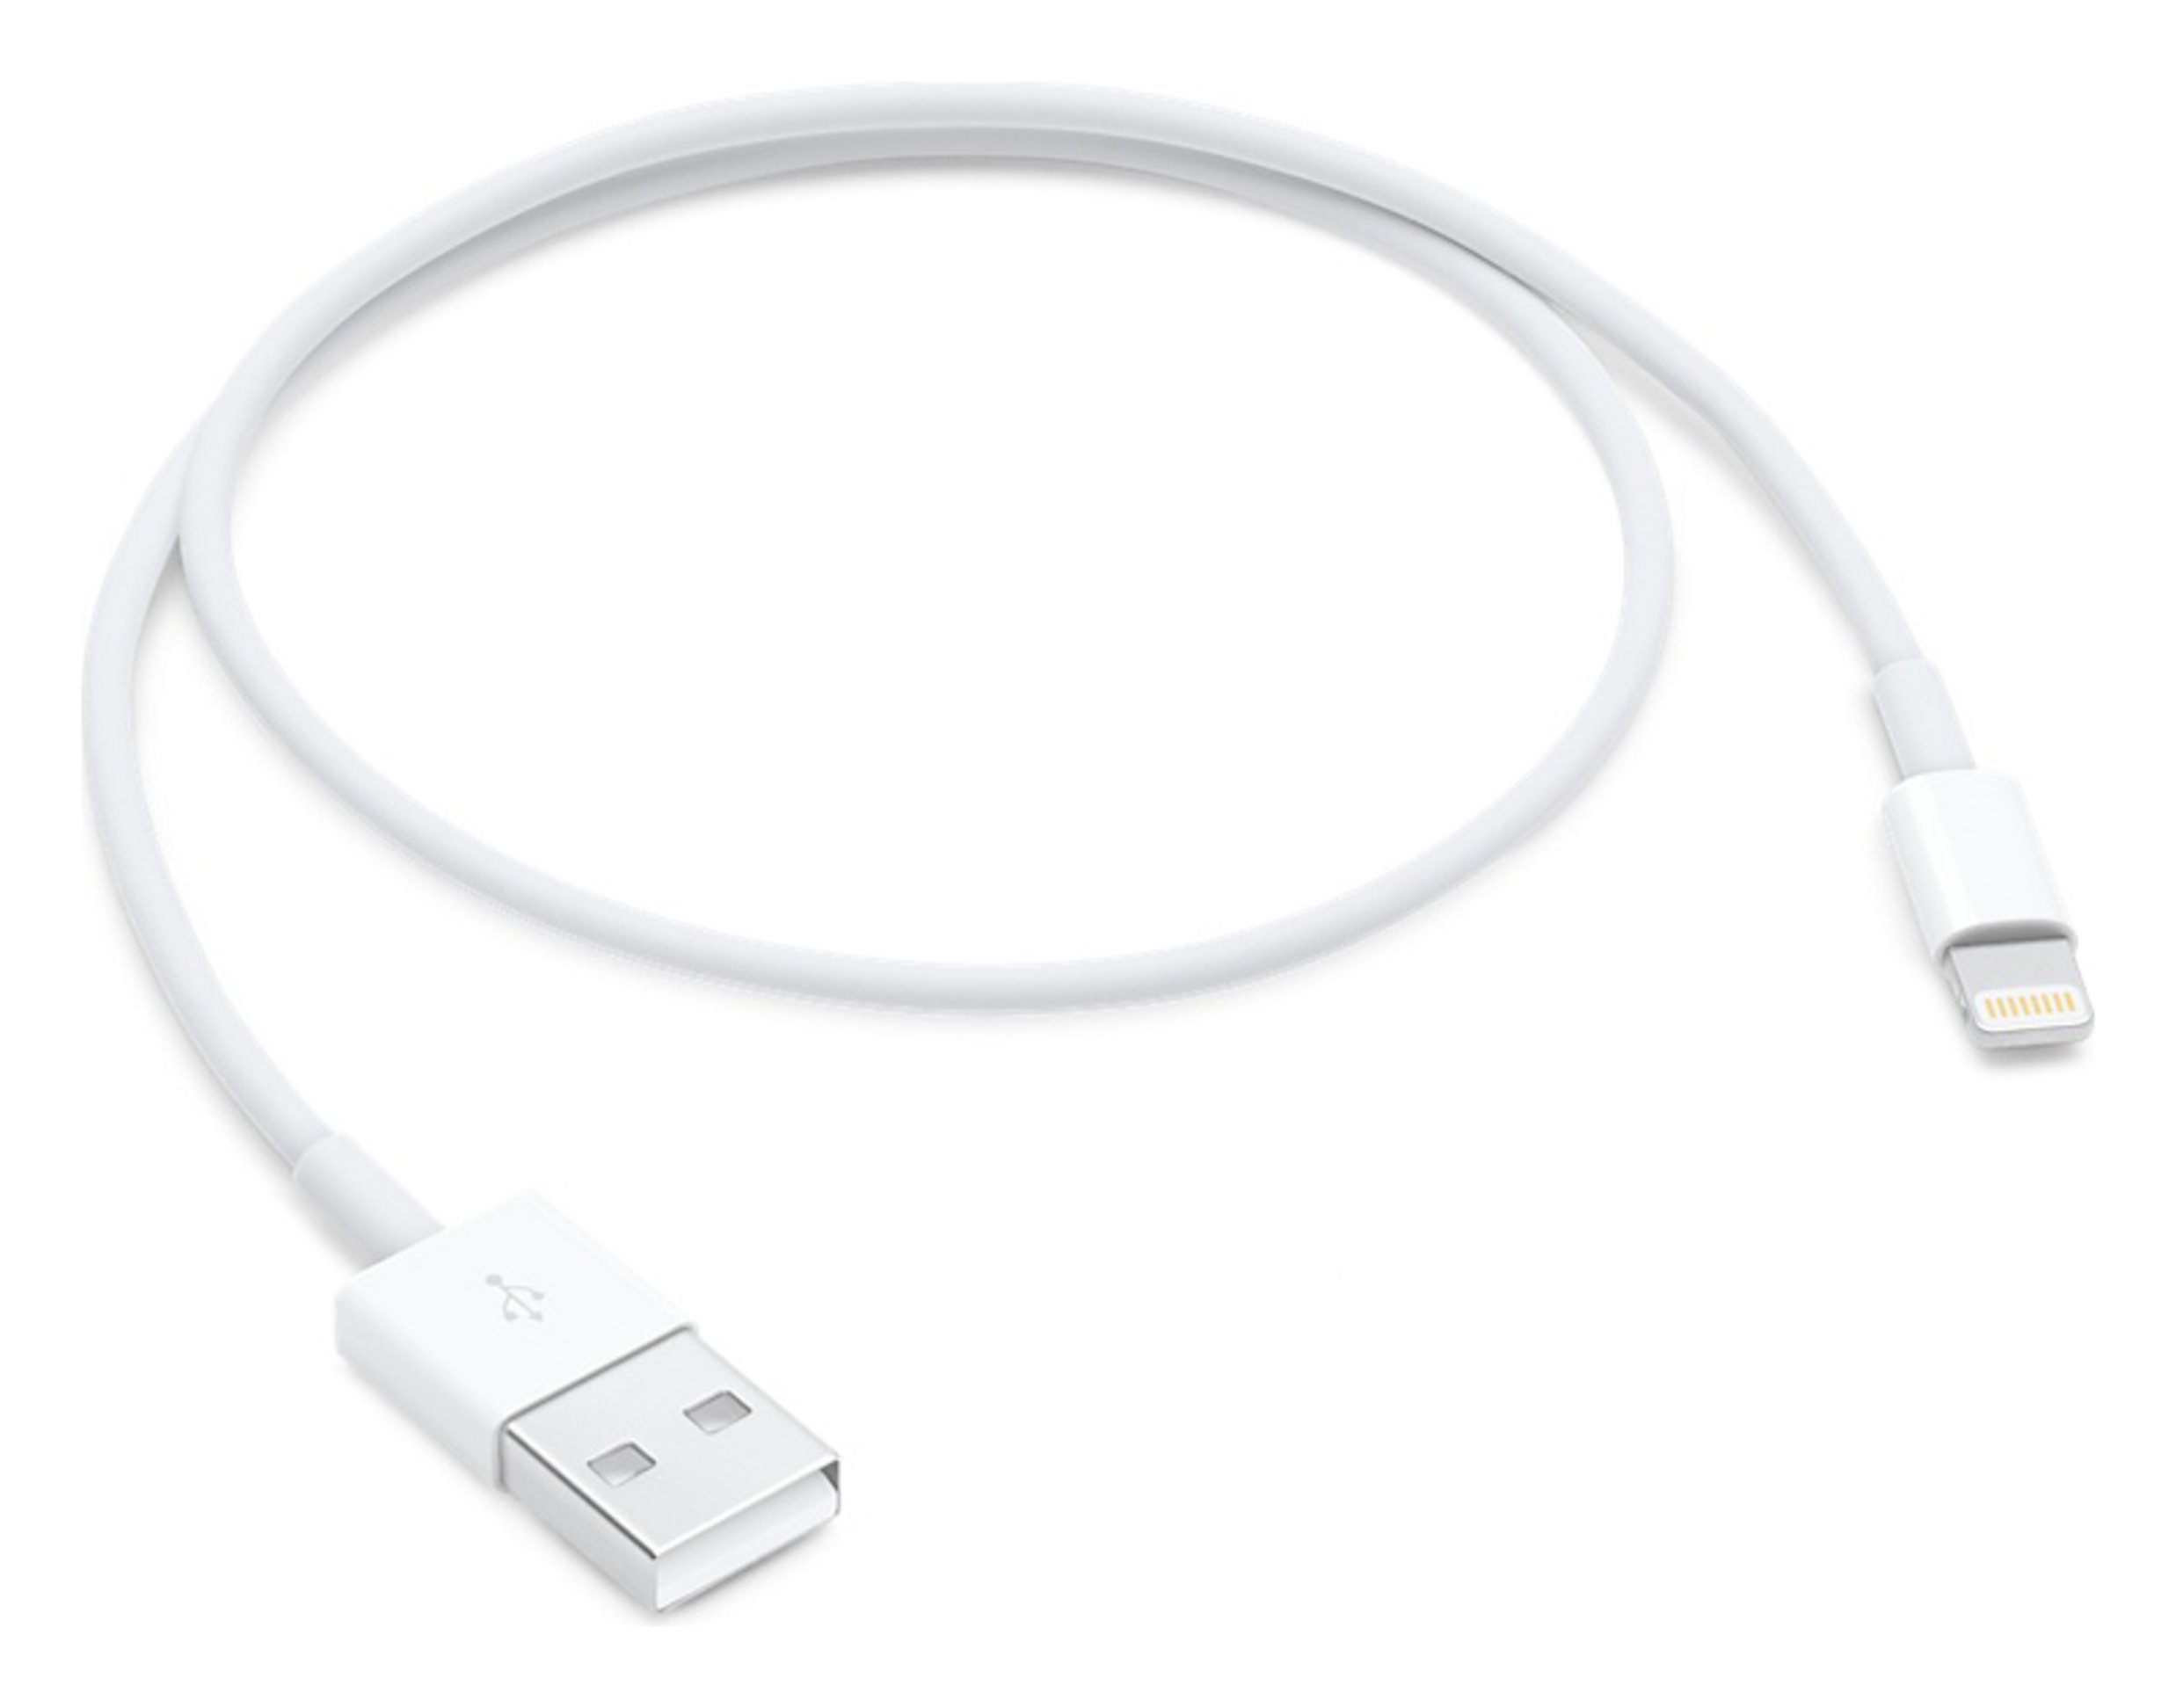 Apple Lightning to USB 0.5m Cable Review